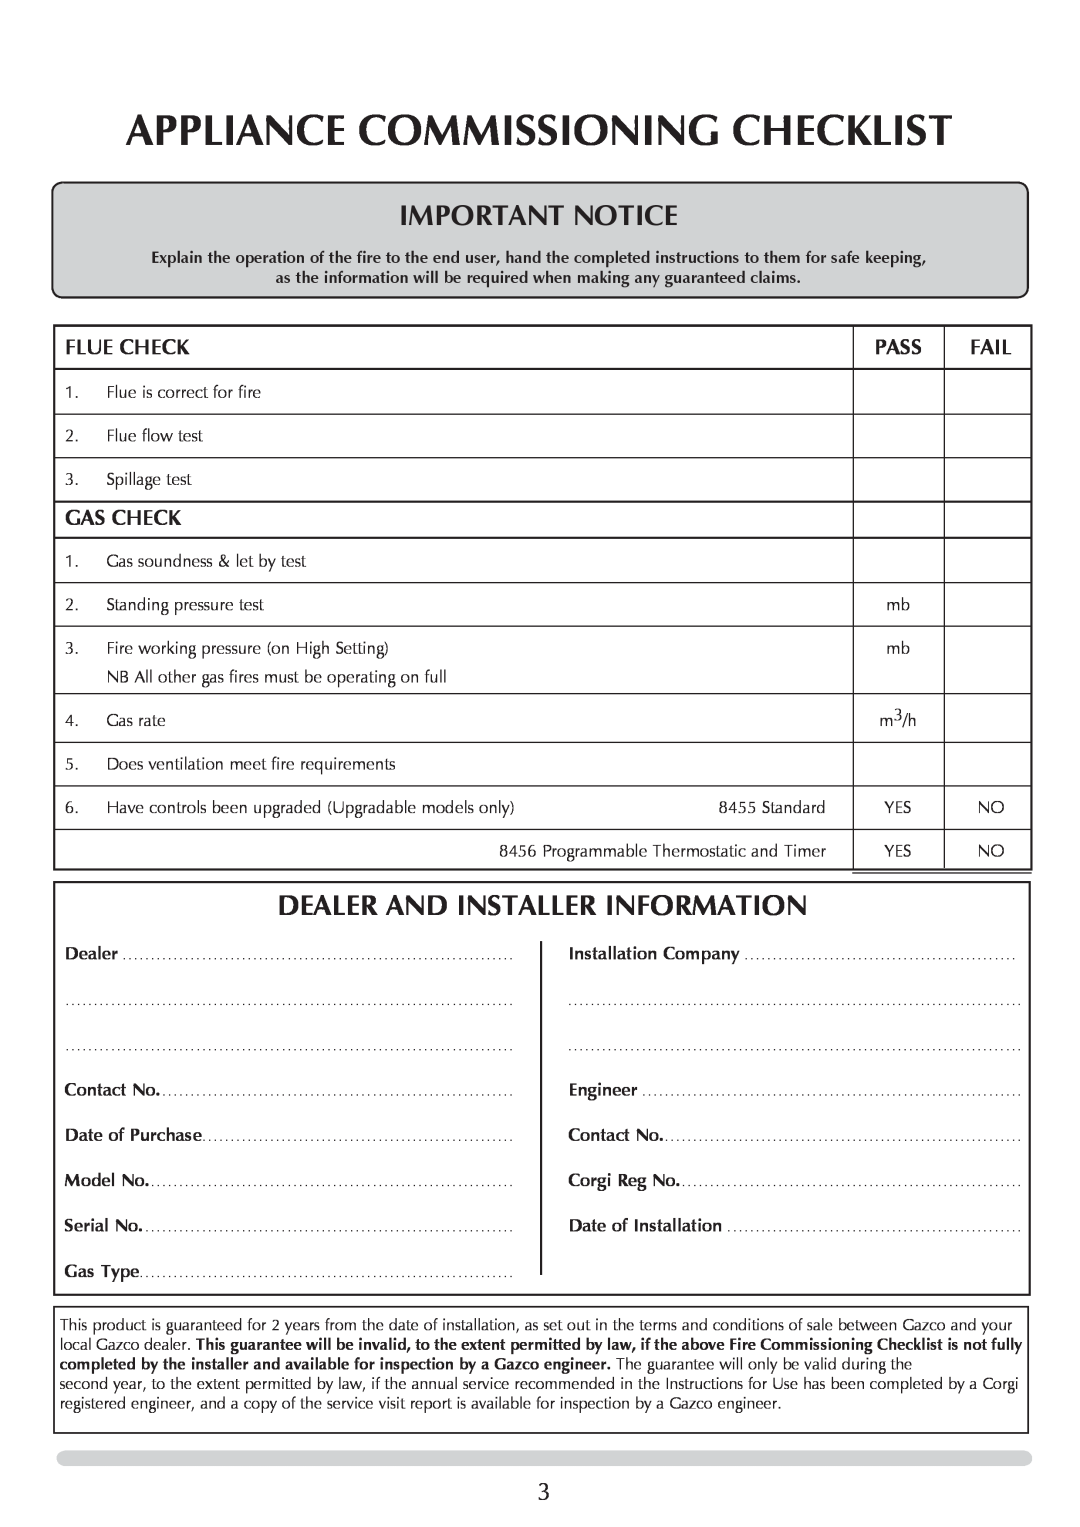 Stovax PR0741 Appliance Commissioning Checklist, IMPORTaNT NOTICE, Dealer And Installer Information, Flue Check, Pass 